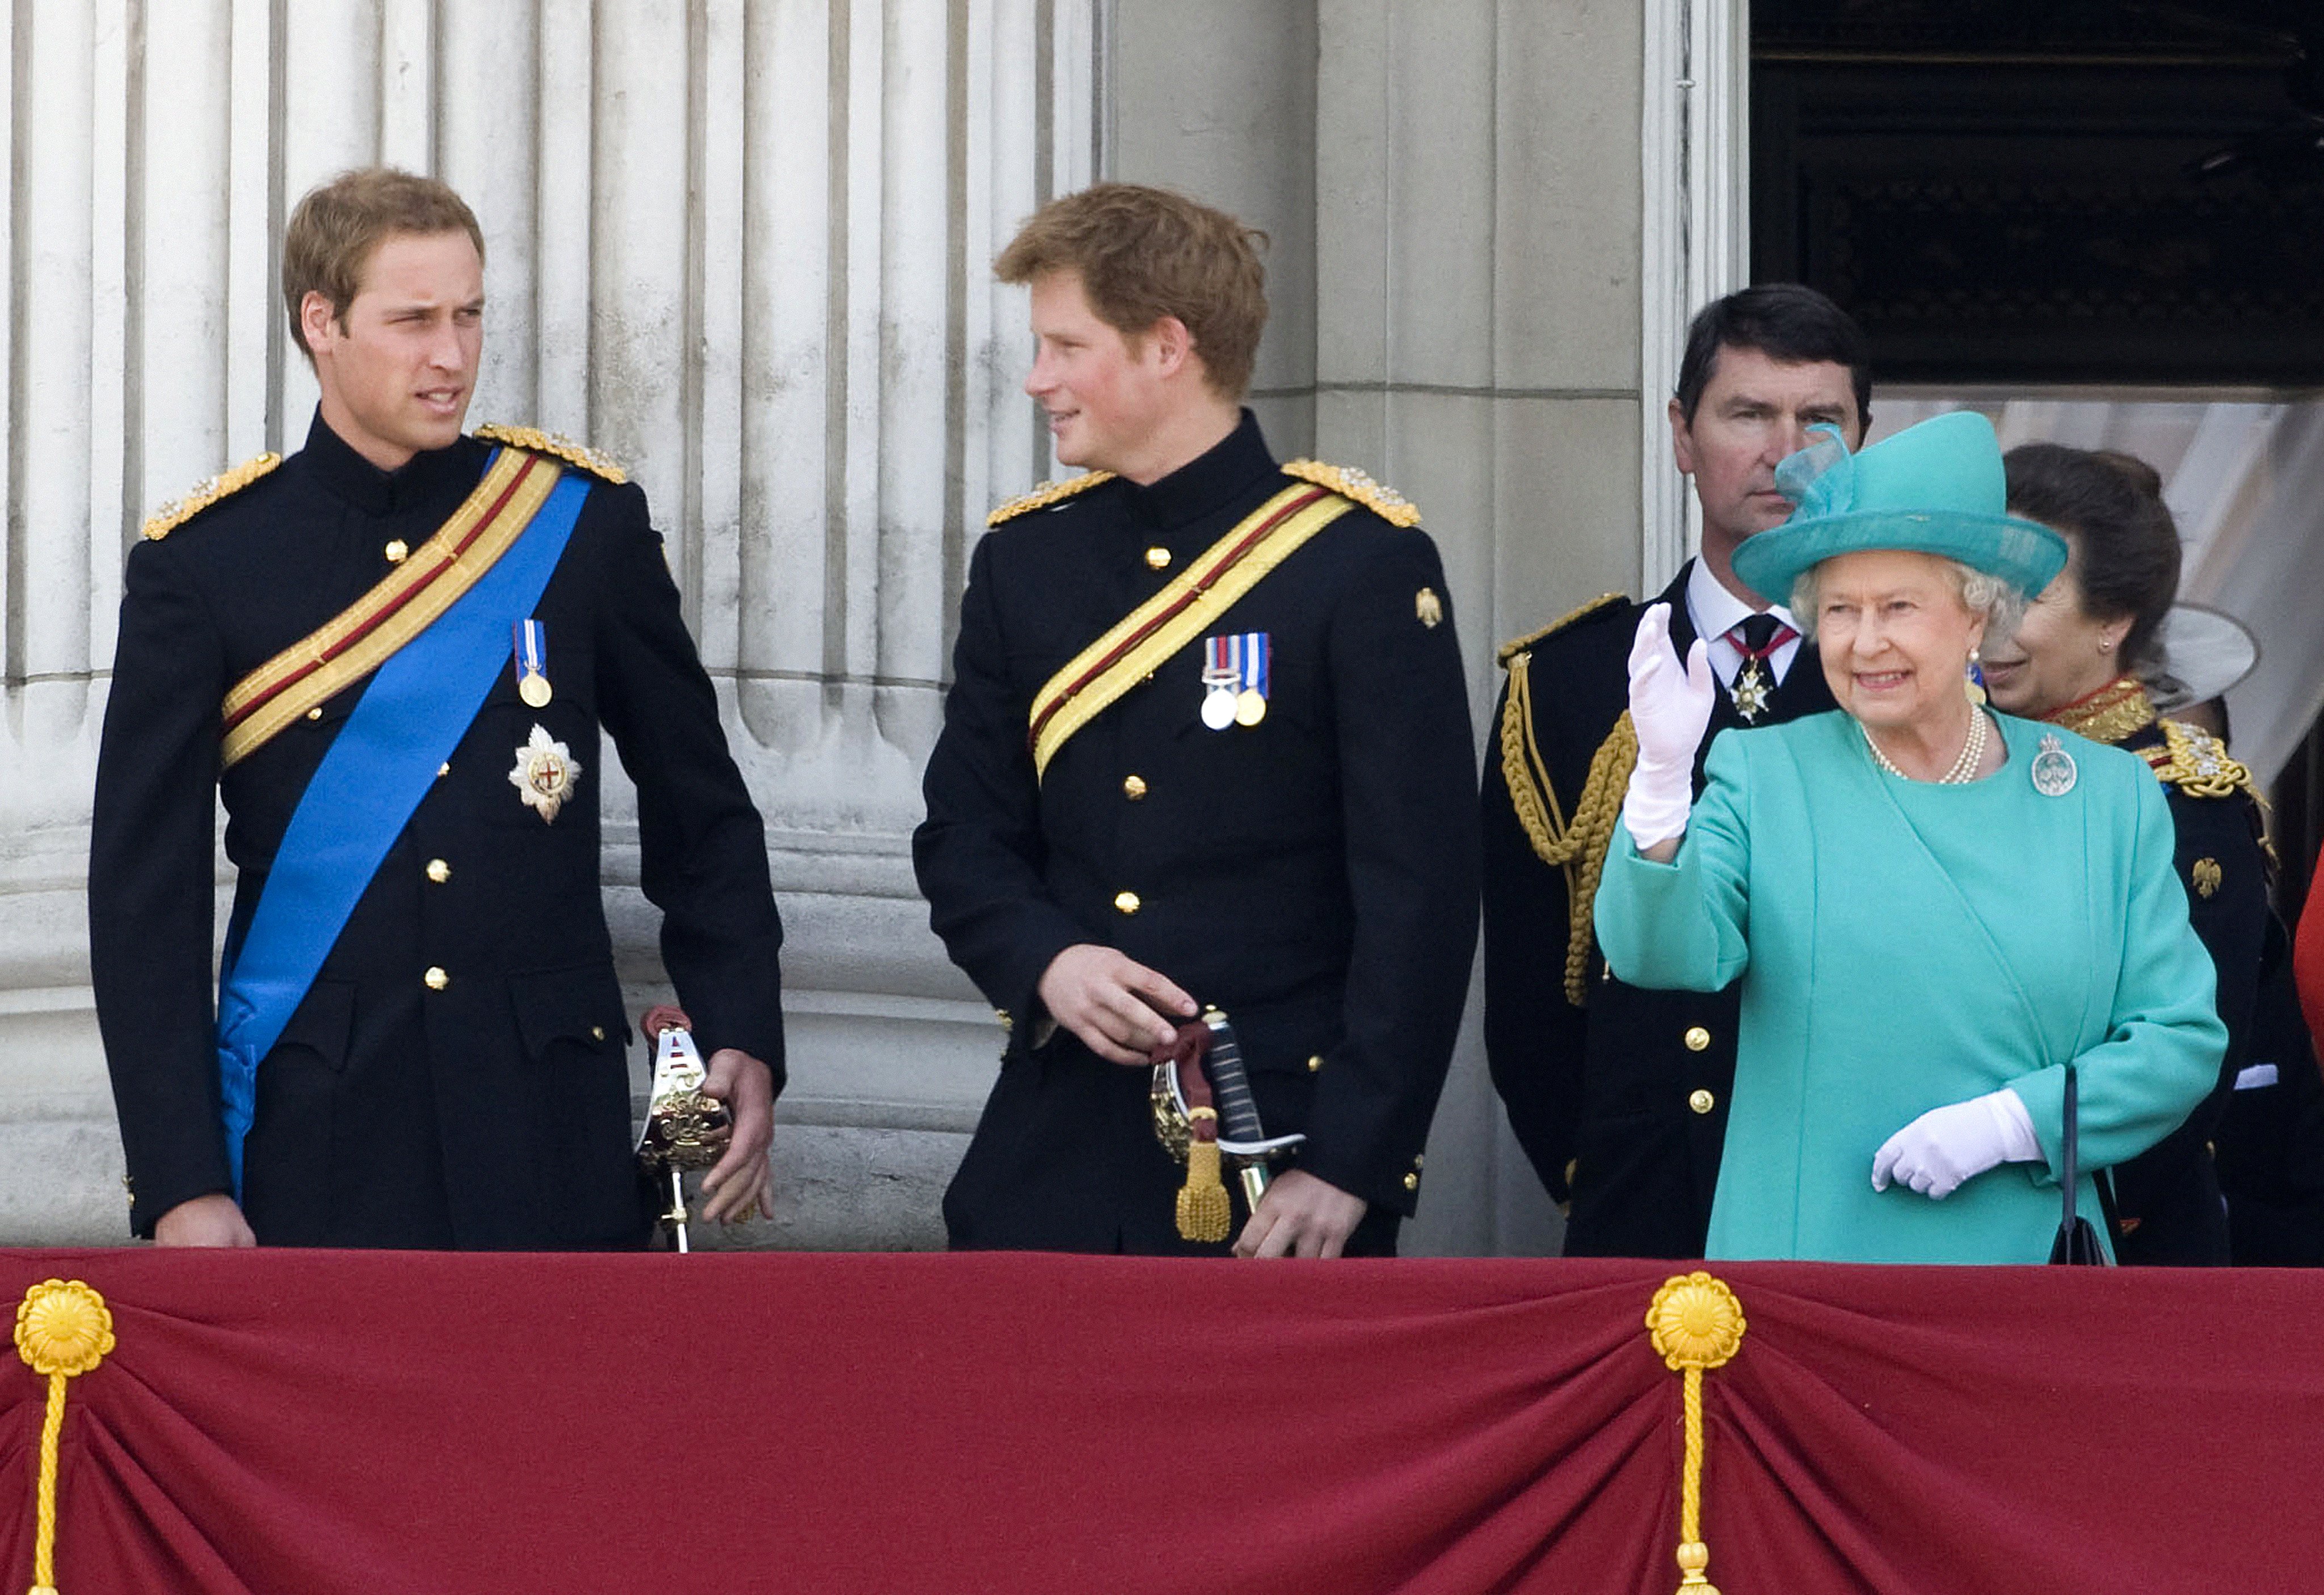 Prince William, Prince Harry and Queen Elizabeth Il at The Conclusion Of The Annual Trooping The Colour. | Source: Getty Images